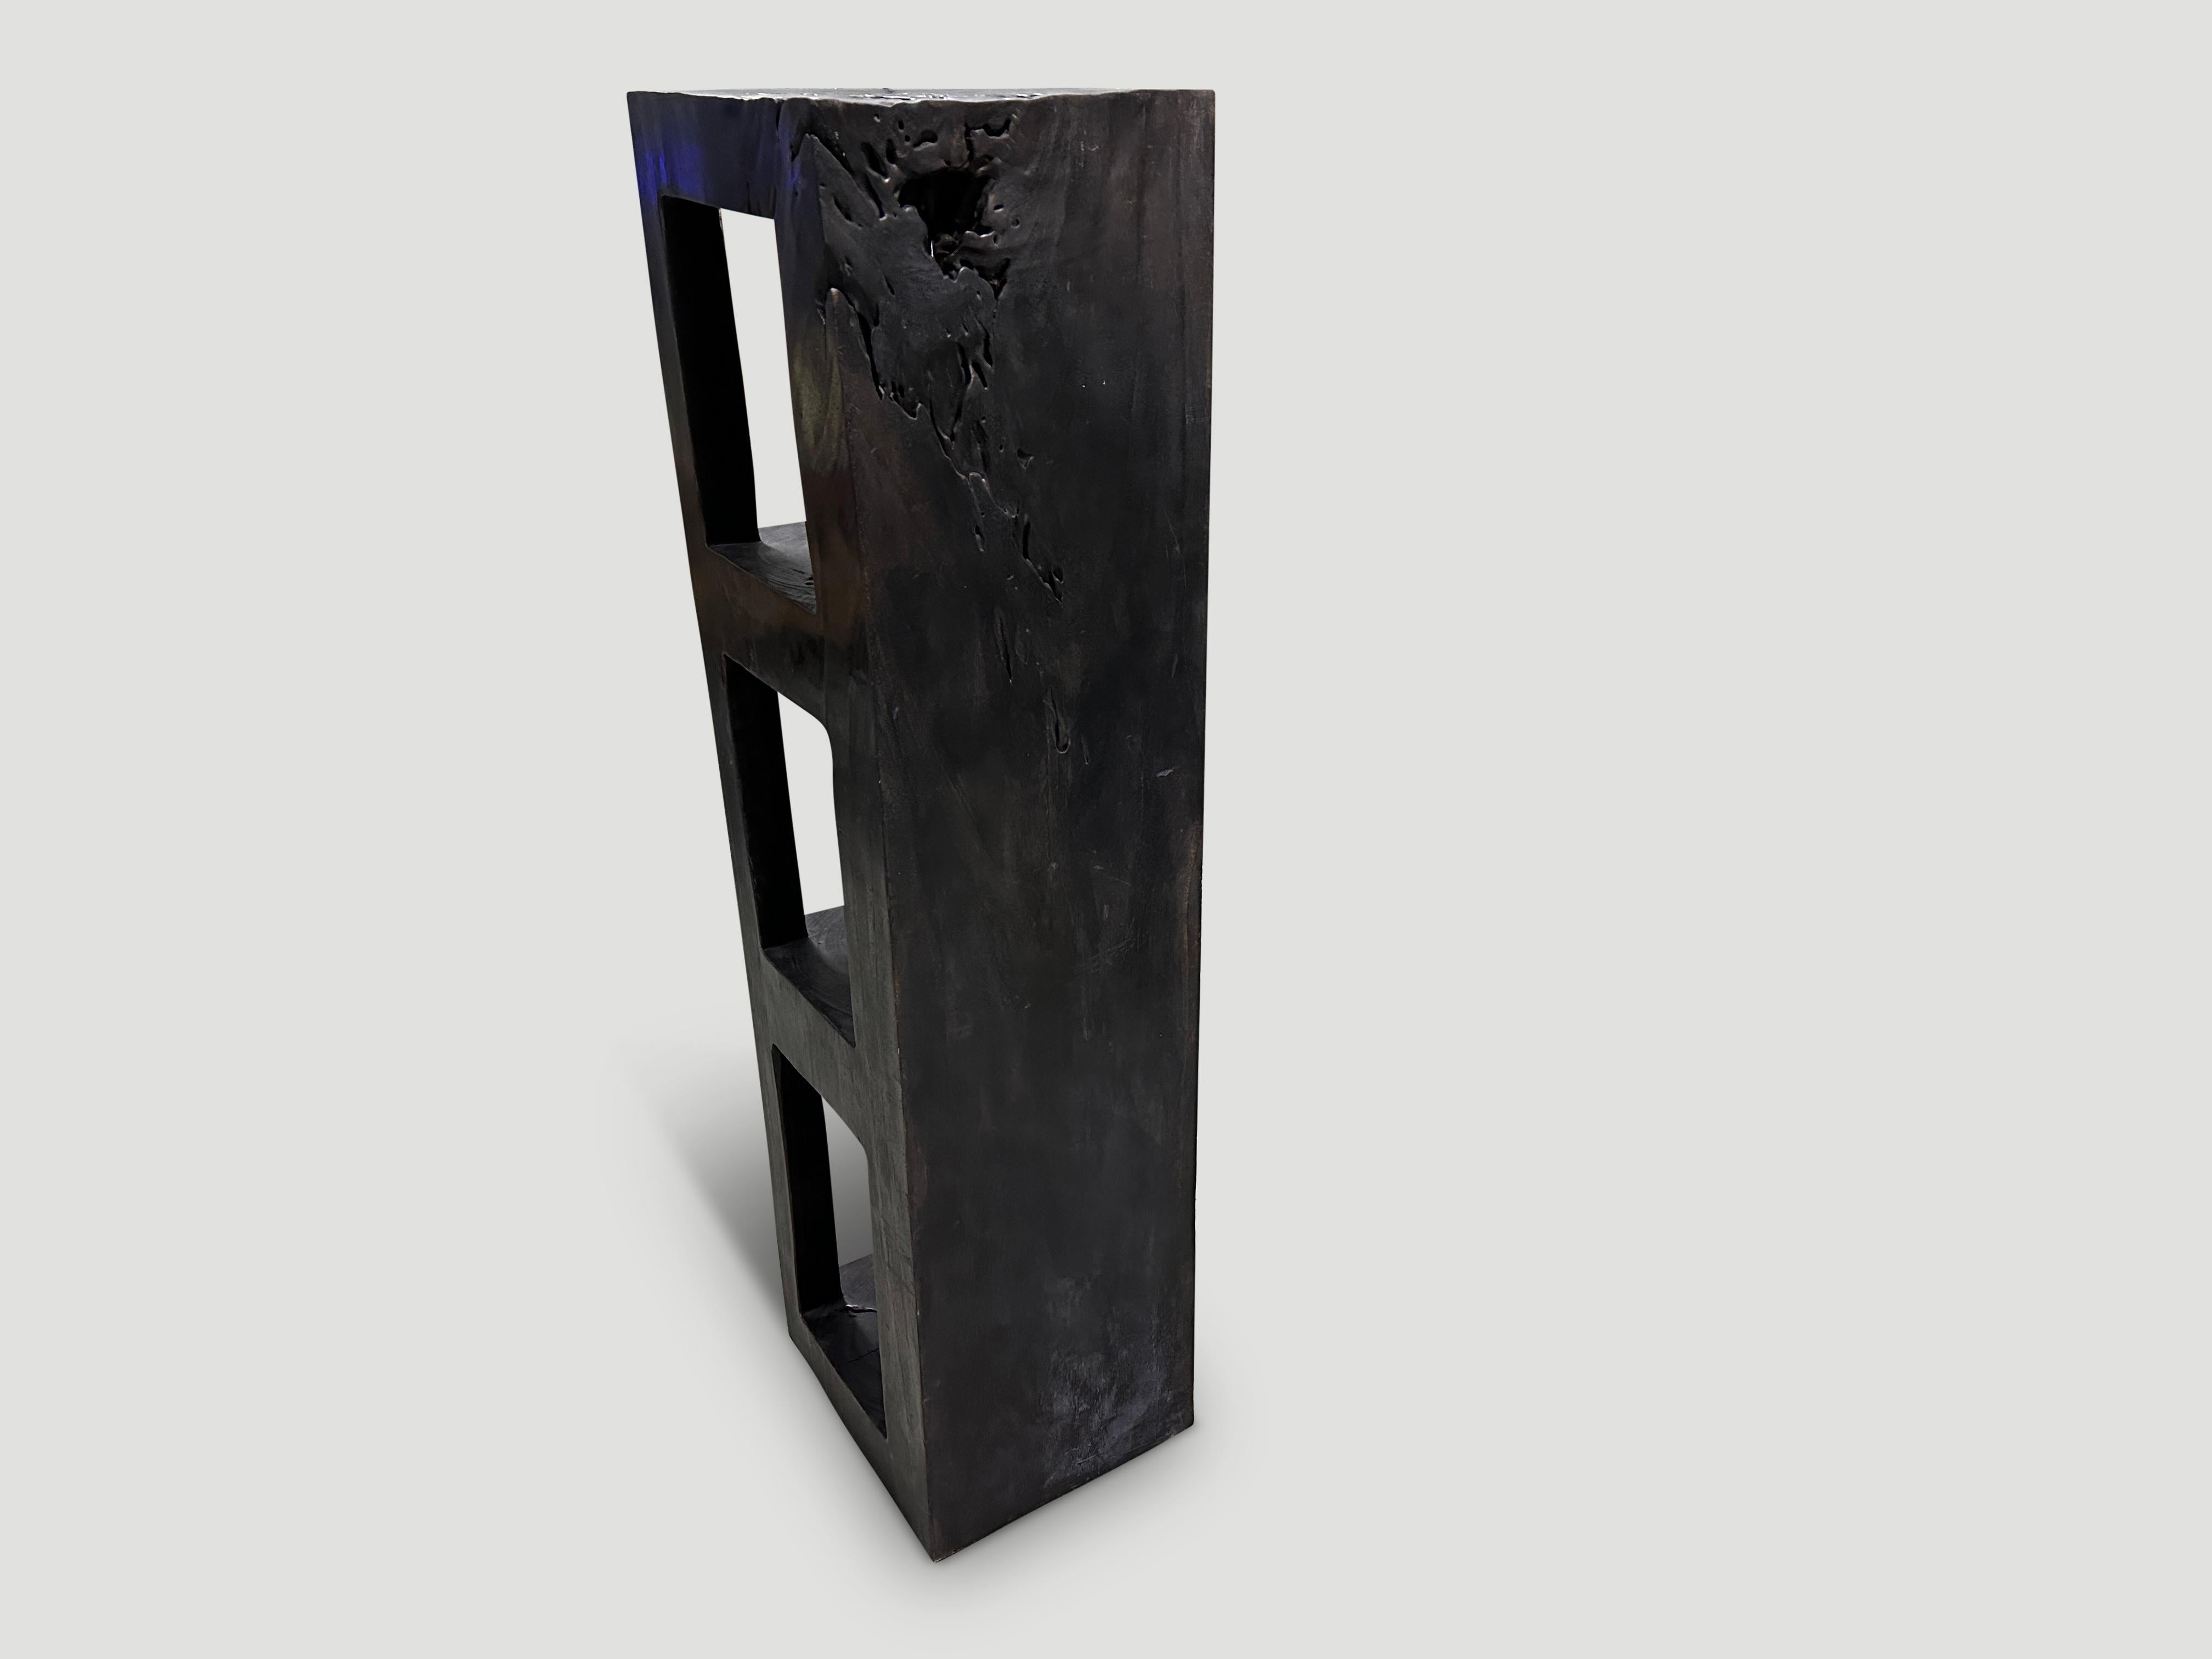 Andrianna Shamaris Log Style Teak Wood Charred Shelf In Excellent Condition For Sale In New York, NY